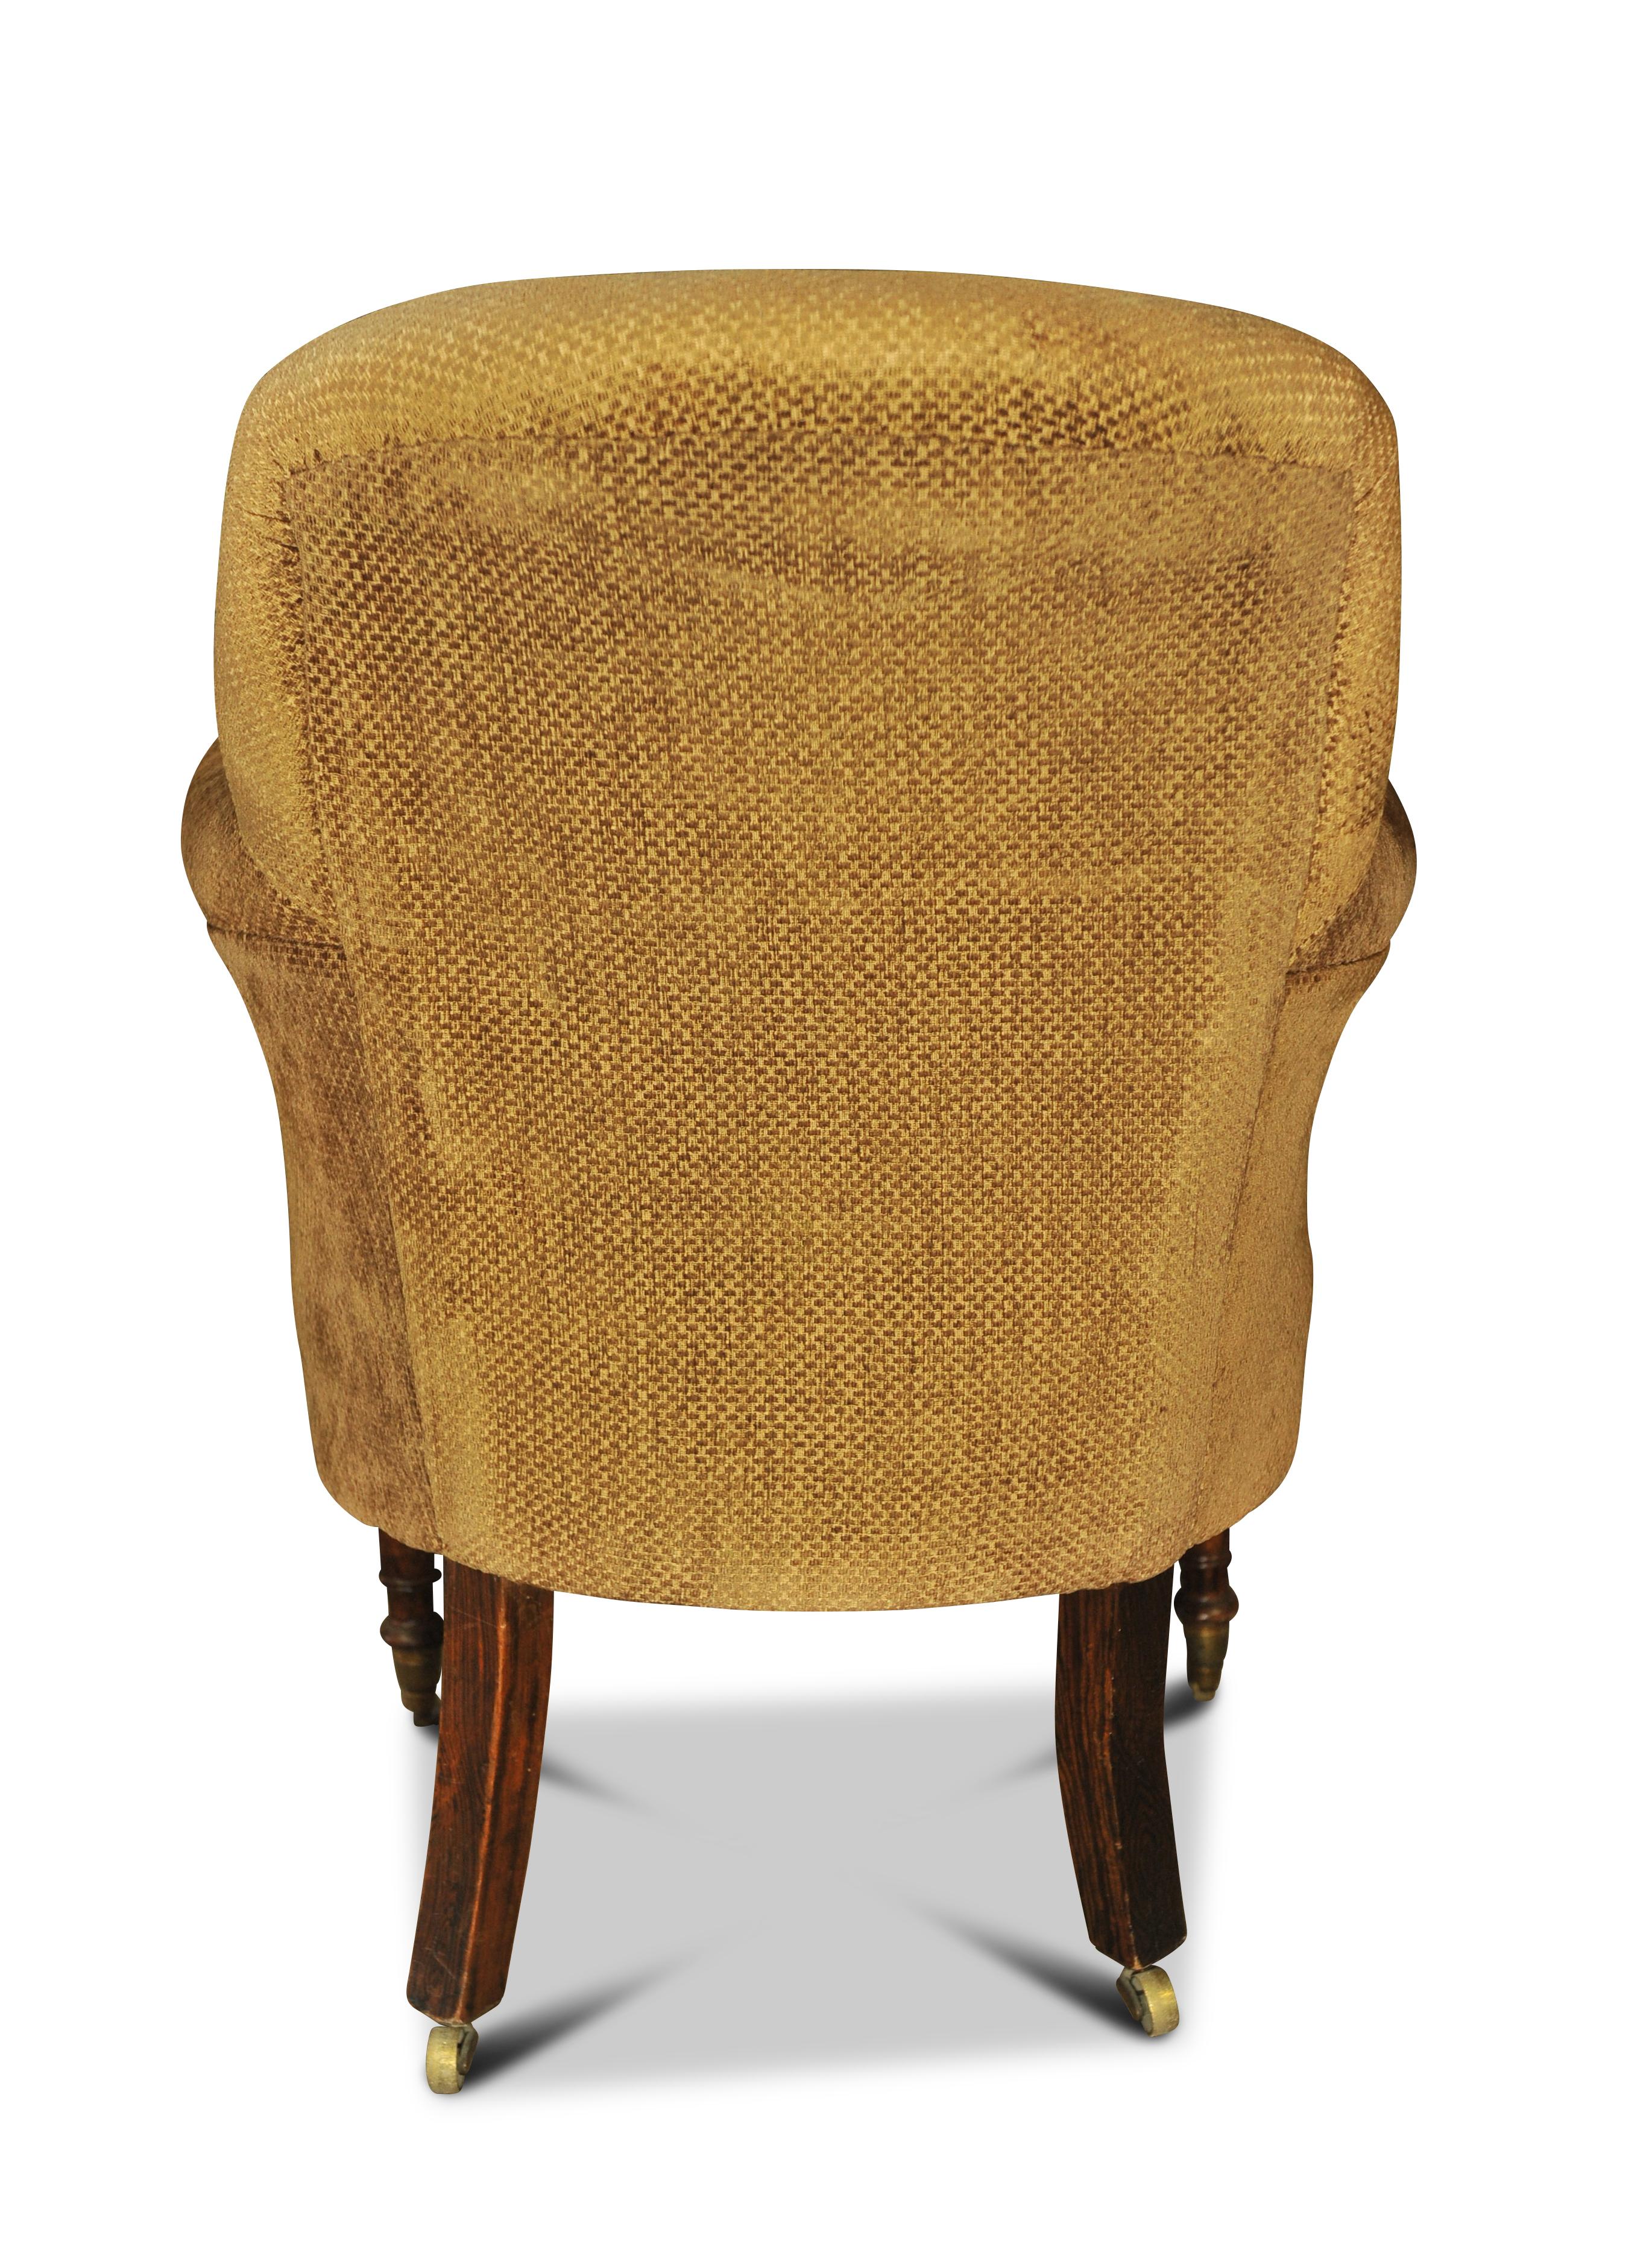 19th Century William IV Tub Chair On Brass Castors, Sabre Legs & Chenille Finish For Sale 2